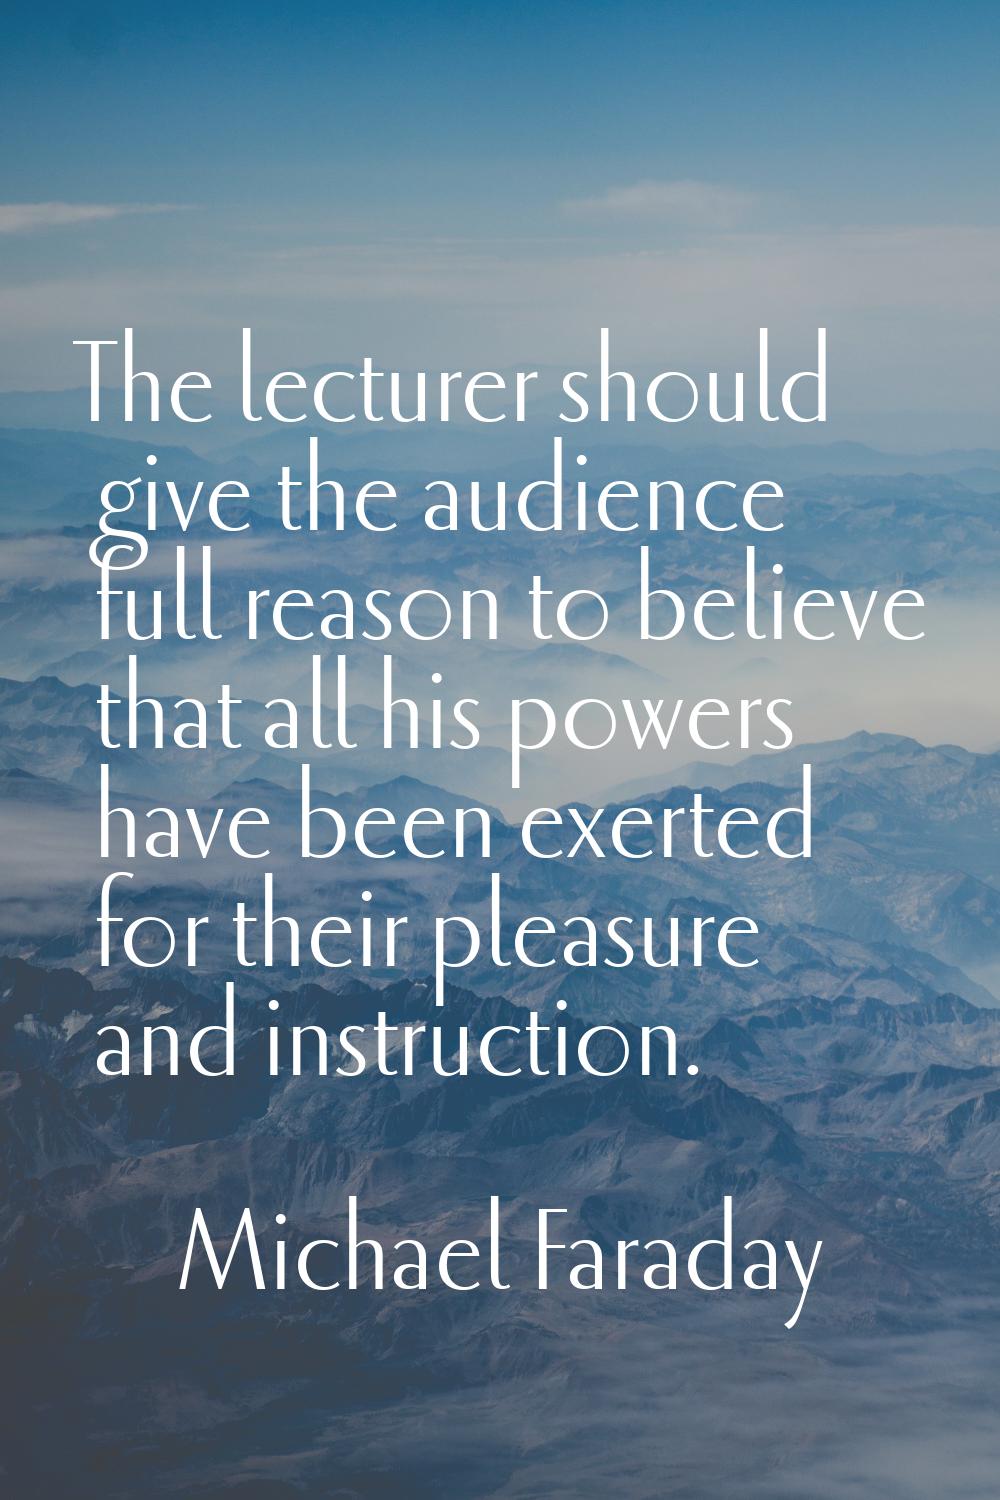 The lecturer should give the audience full reason to believe that all his powers have been exerted 